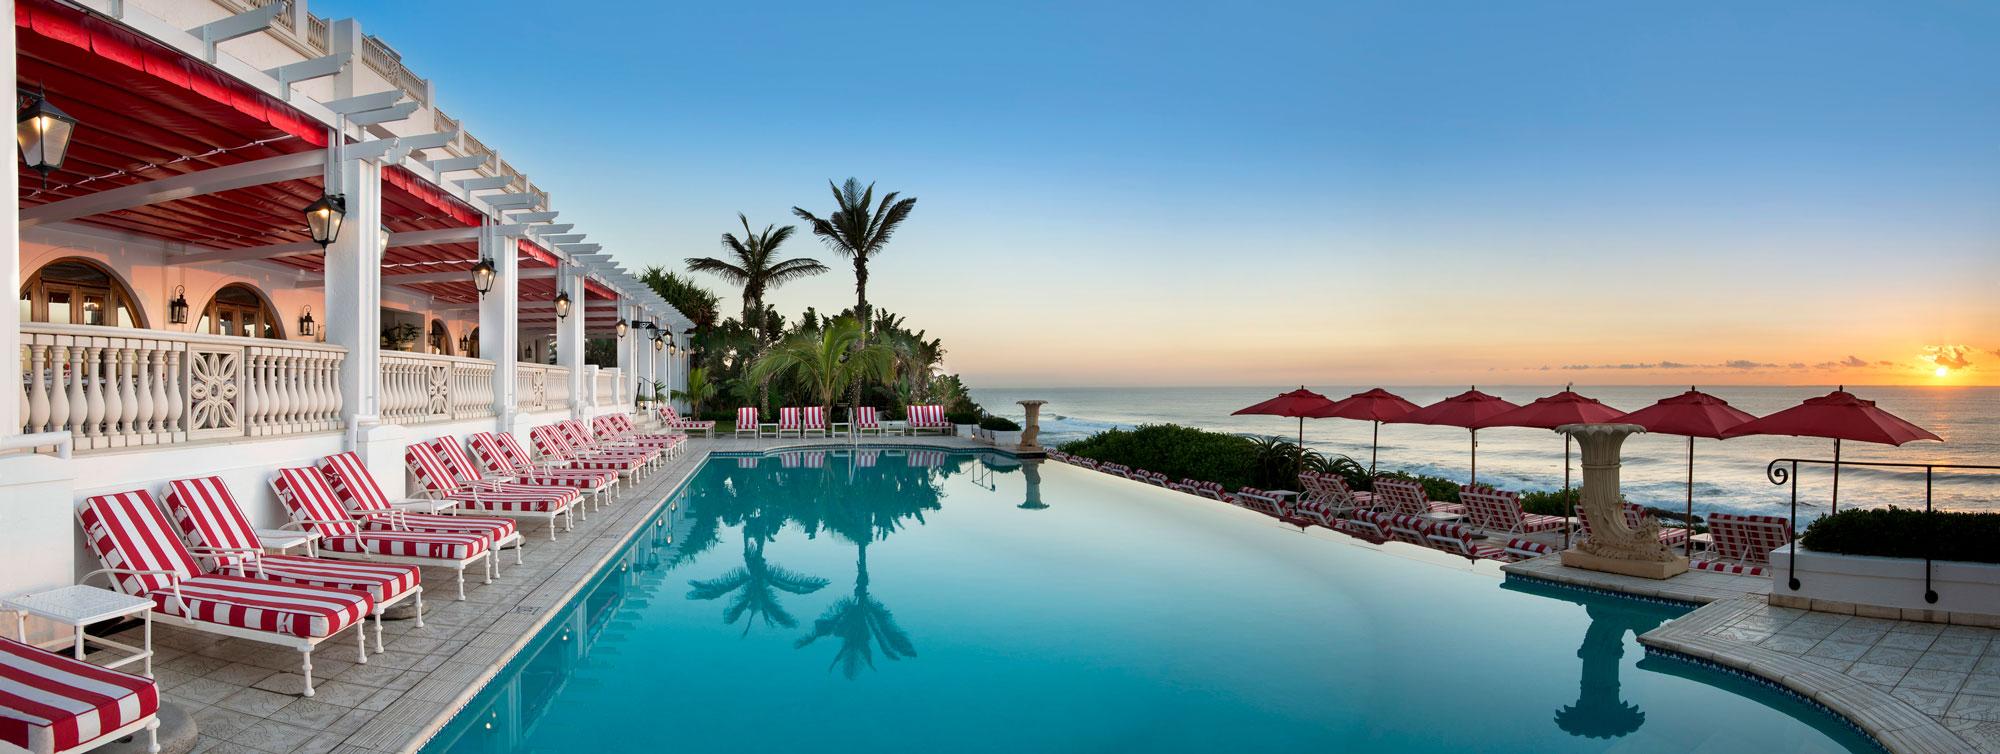 The Oyster Box Hotel's impressive main pool within impressive South Africa.